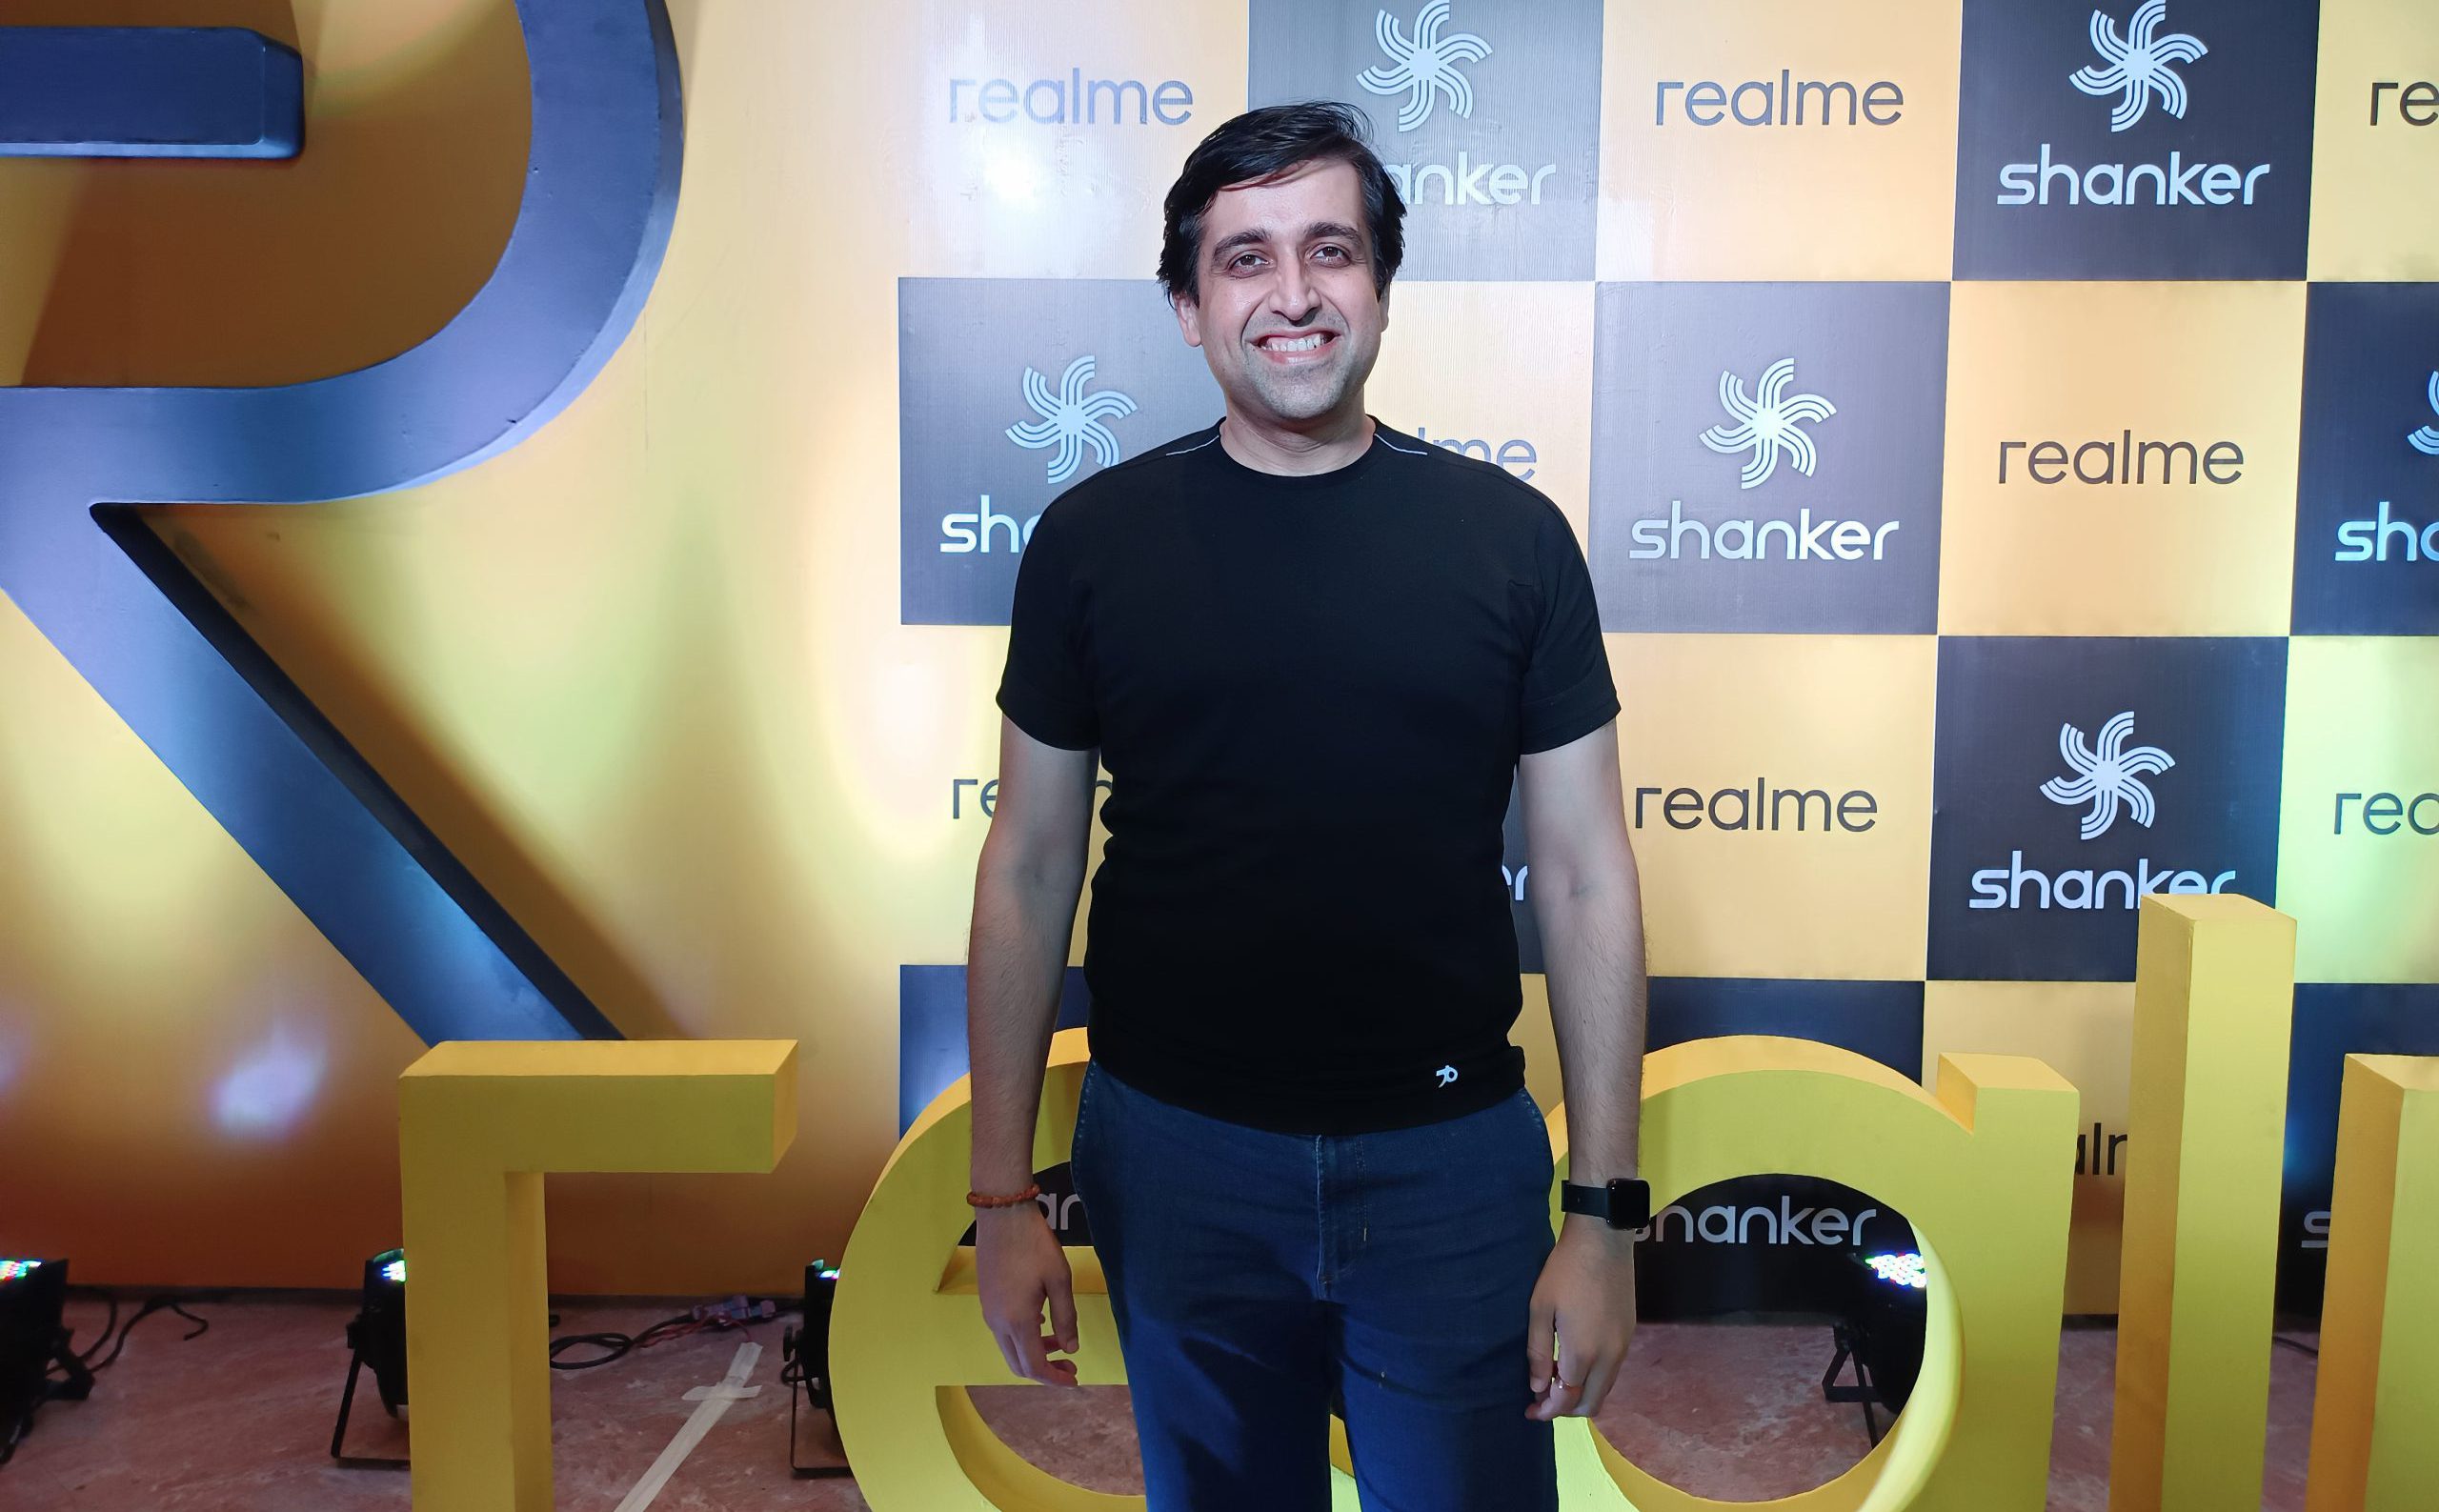 Madhav Sheth, VP of Realme and CEO of Realme India and Europe